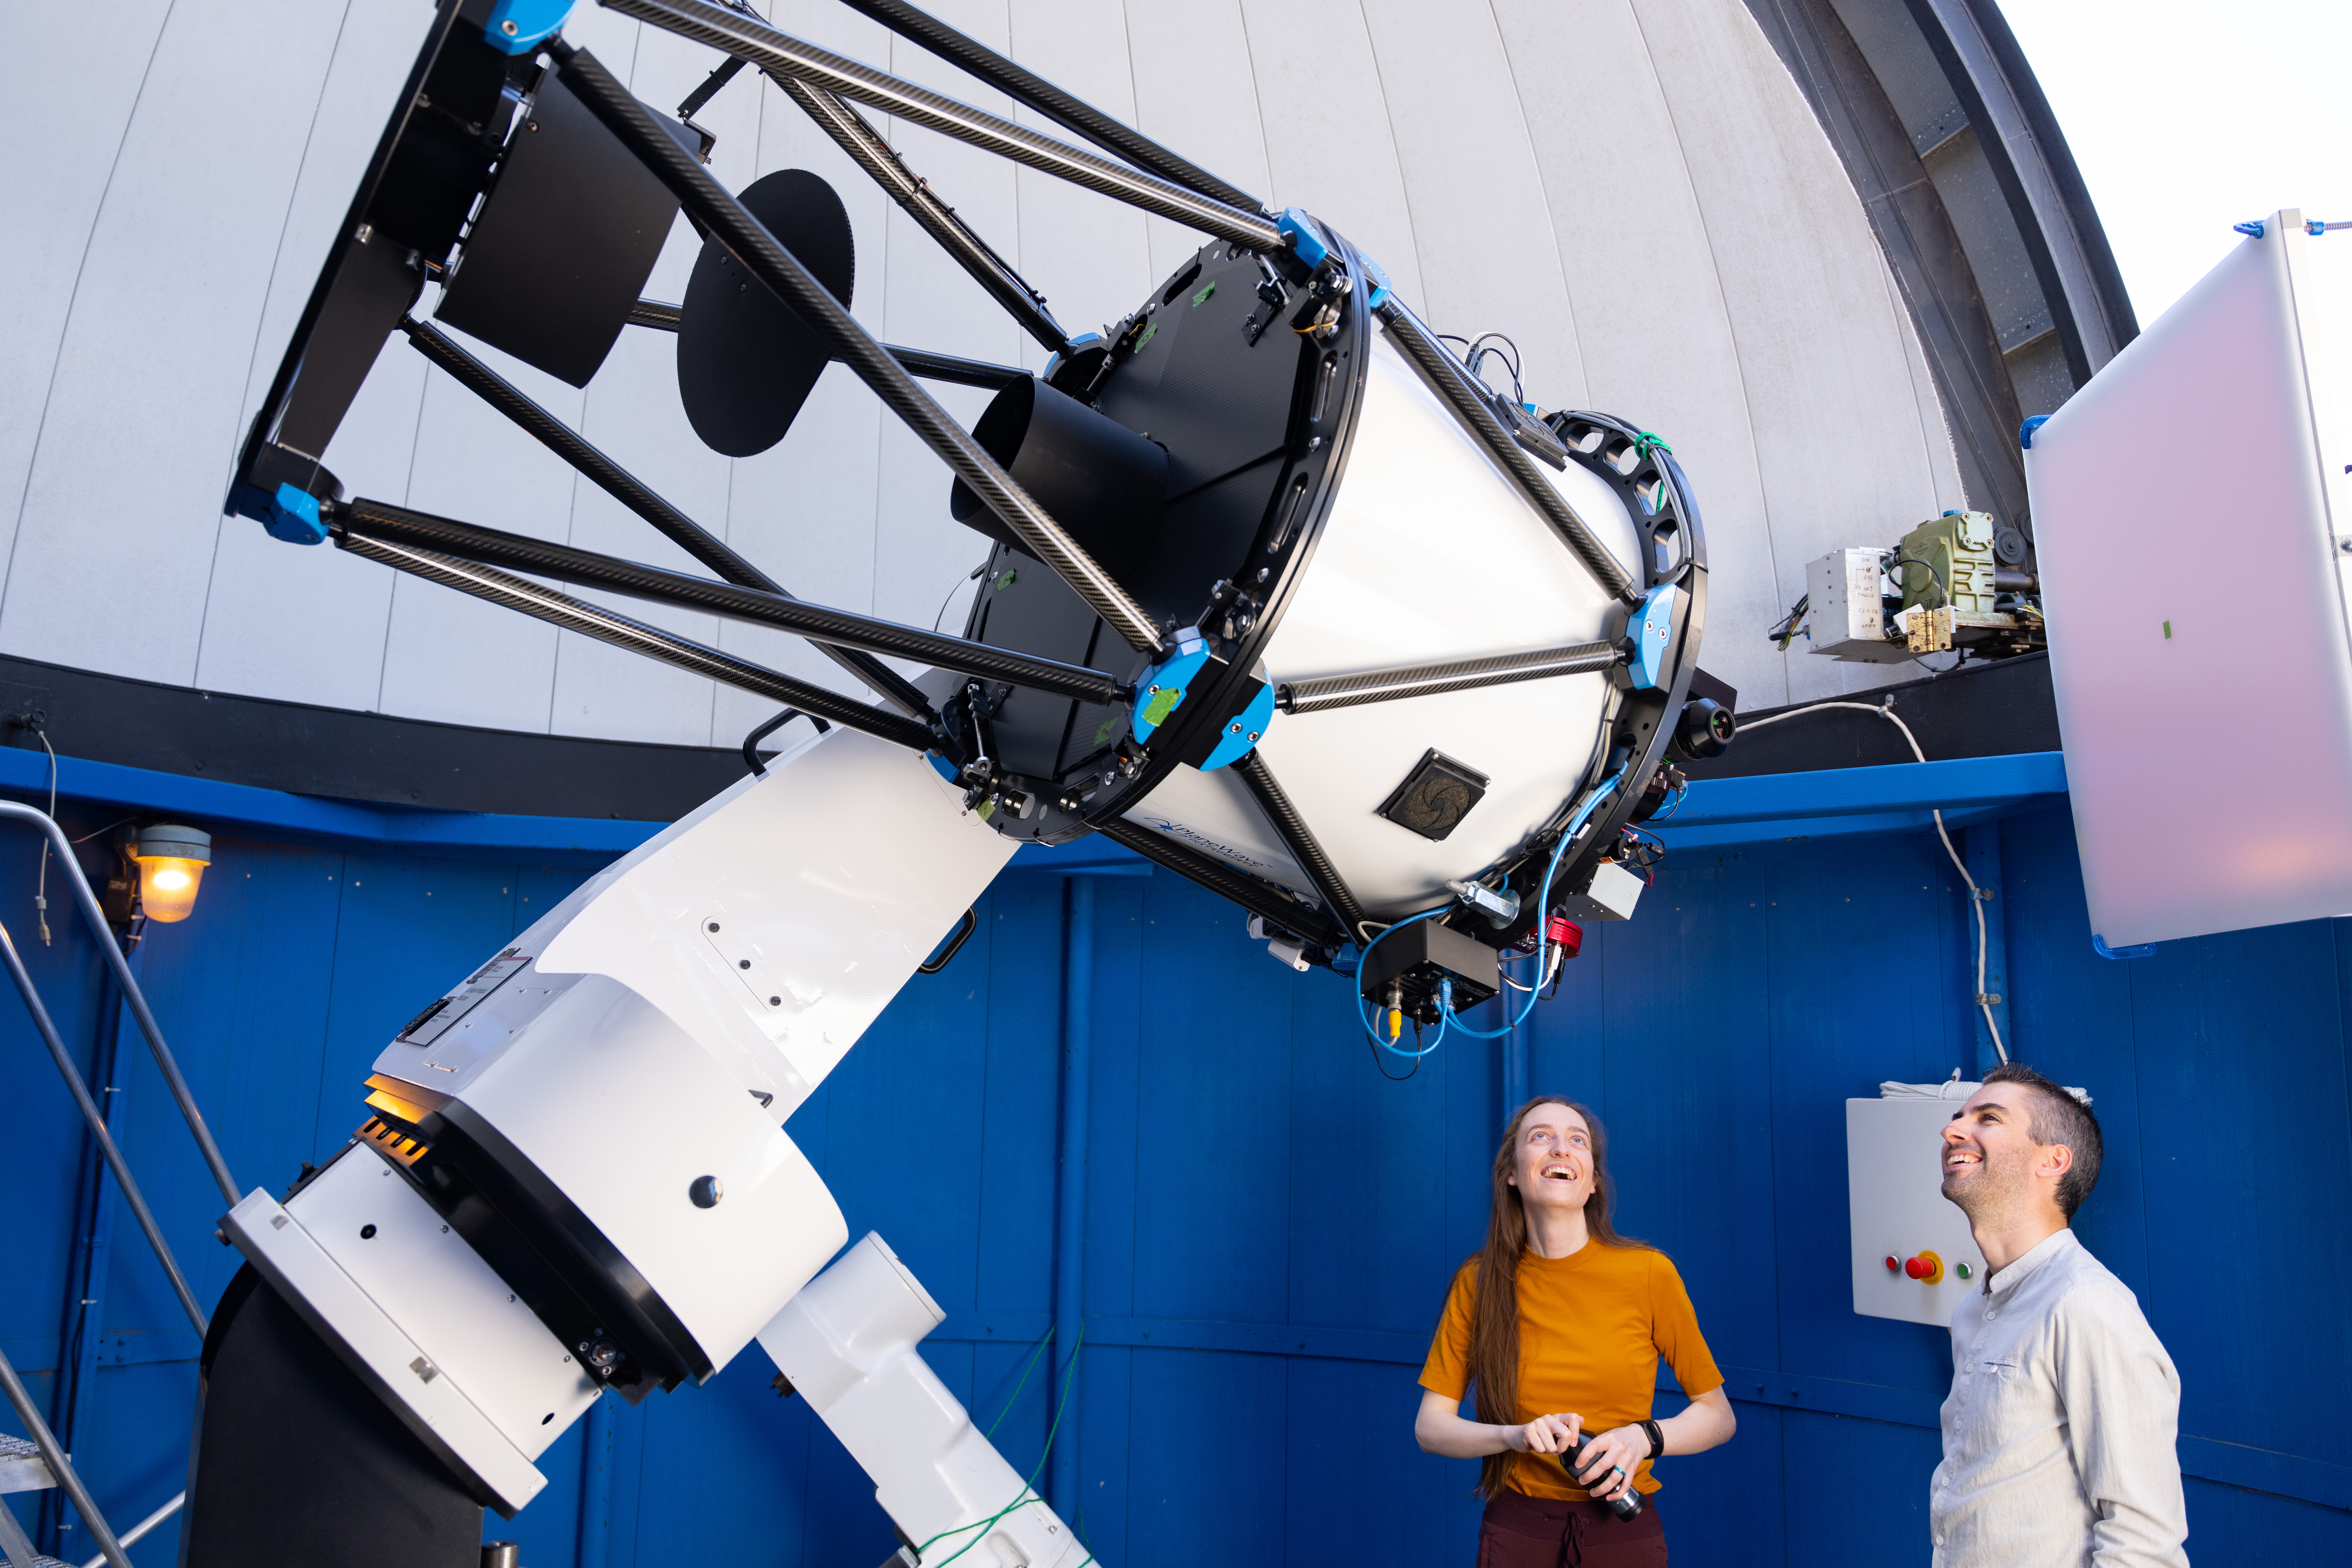 Image inside the Burke-Gaffney Observatory dome with white ceilings and blue coloured walls. The white and black telescope is being pointed to by Tiffany Fields, Astronomy Technician, wearing yellow and Dr. Vincent Henault-Brunet looks onward as well, wearing white.